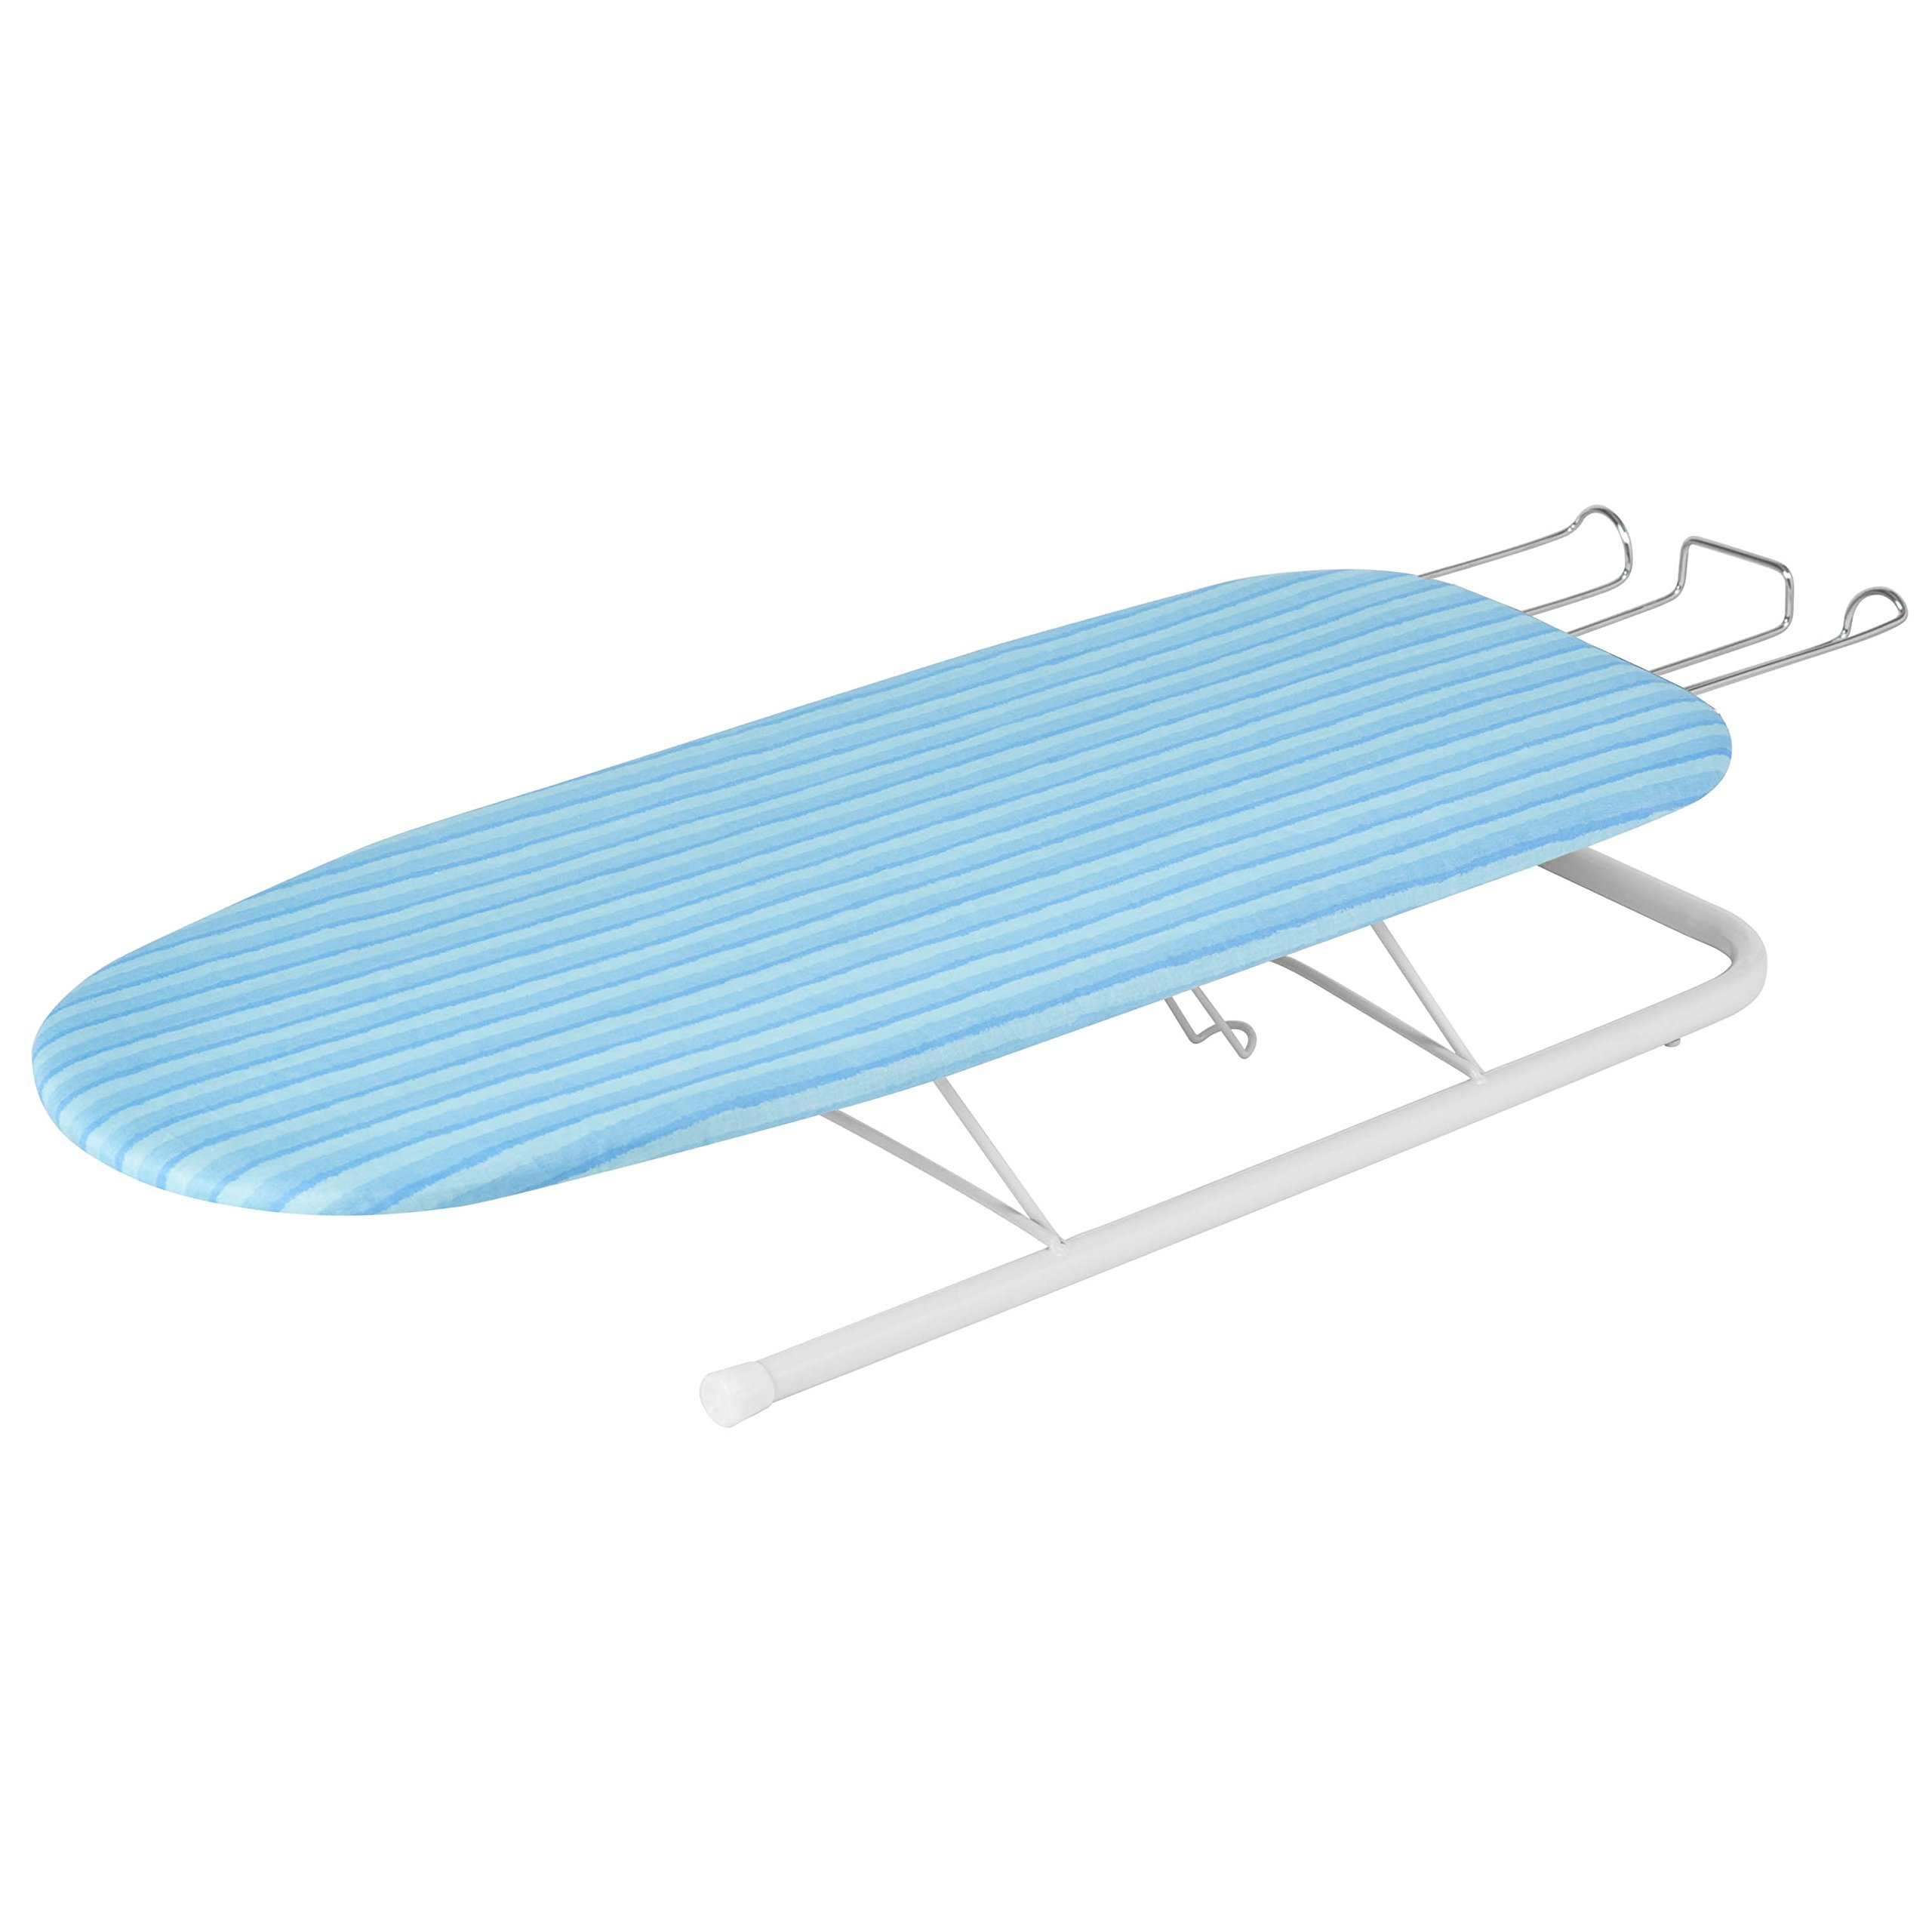 Book Cover Honey-Can-Do Tabletop Ironing Board with Retractable Iron Rest, Aqua Stripe